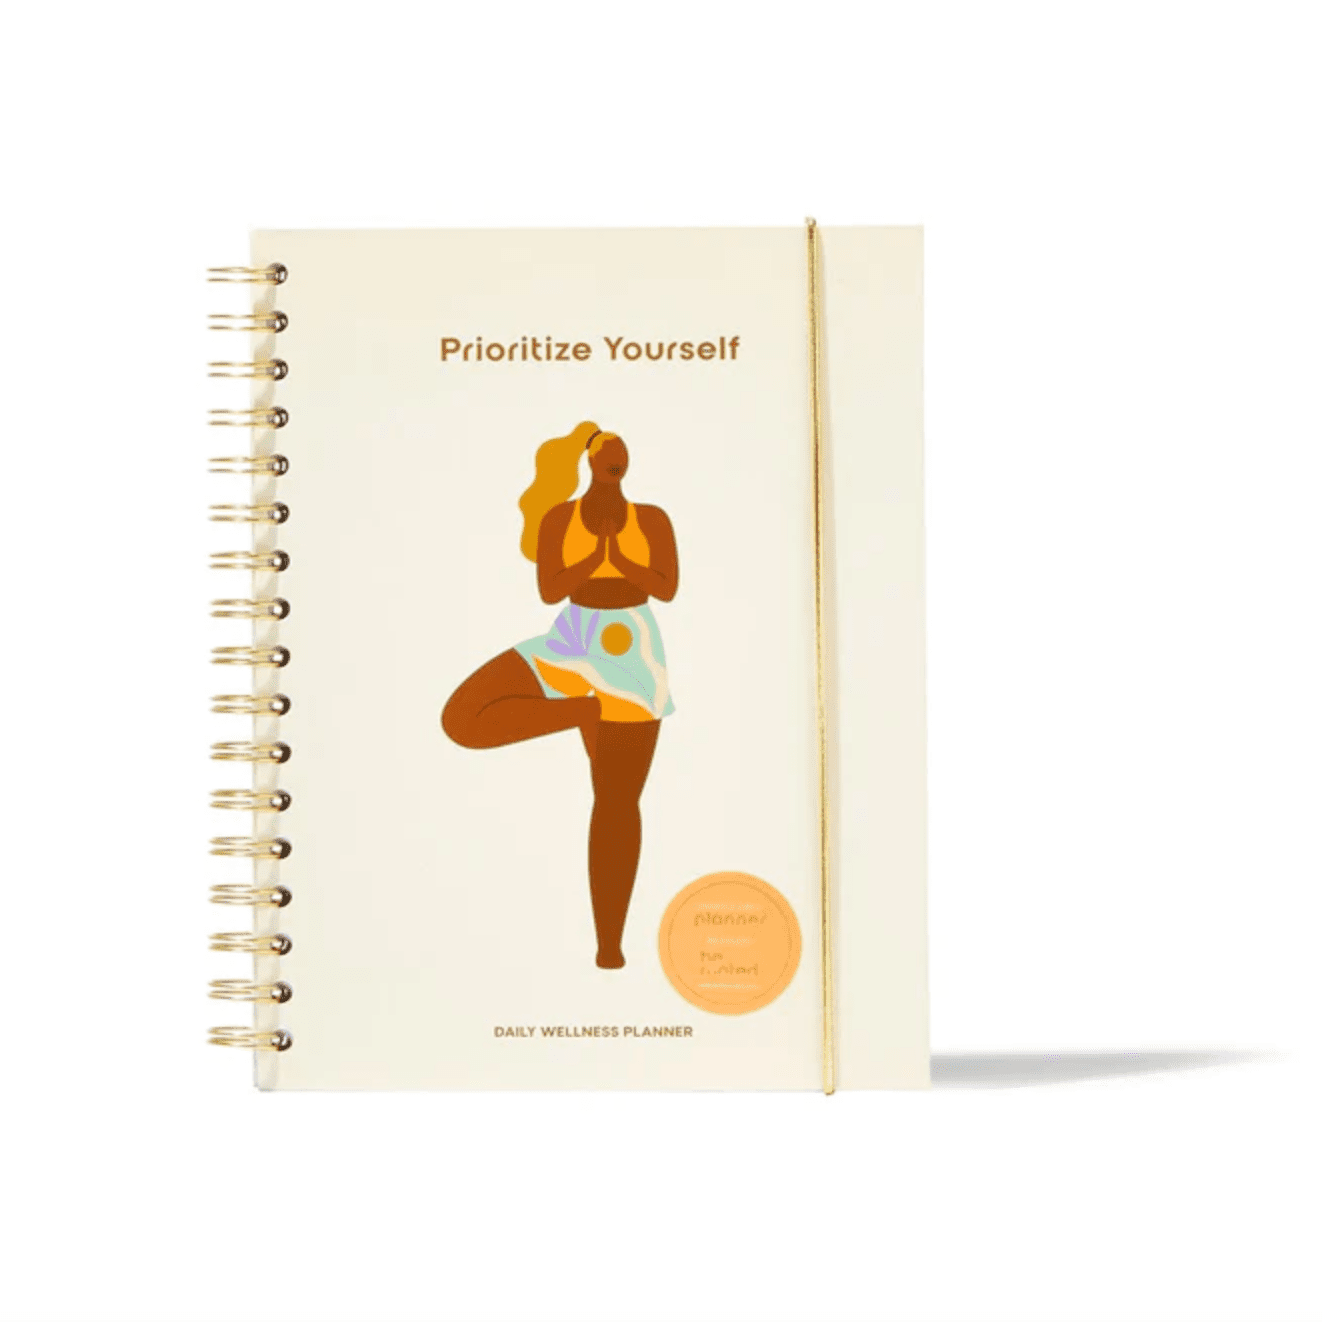 prioritize yourself journal with woman illustration on the cover